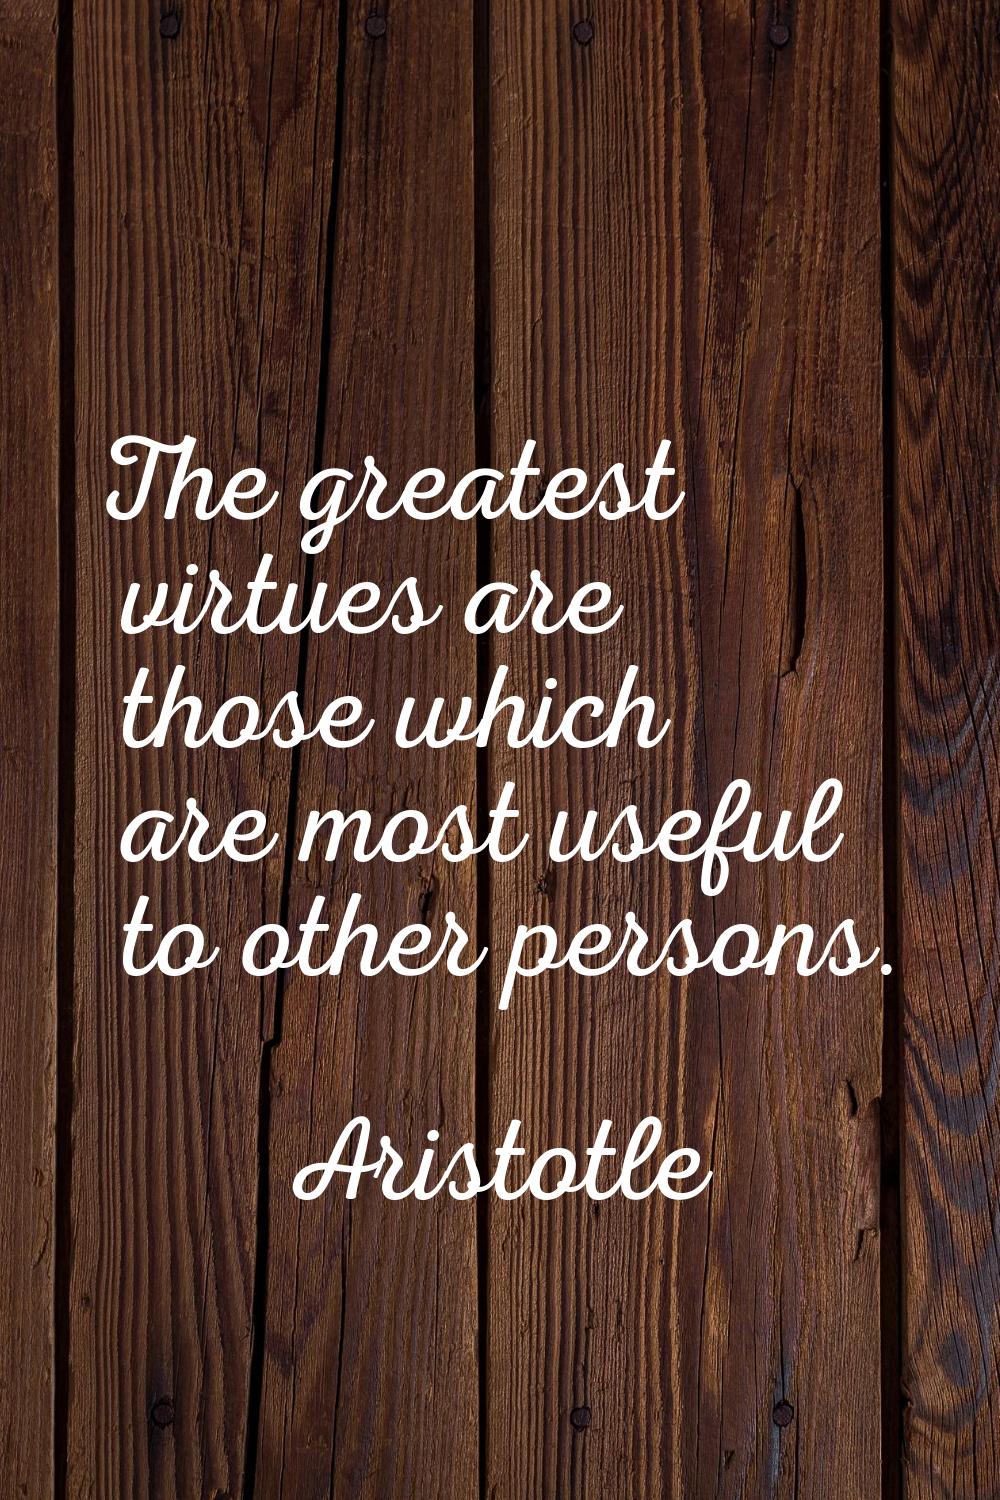 The greatest virtues are those which are most useful to other persons.